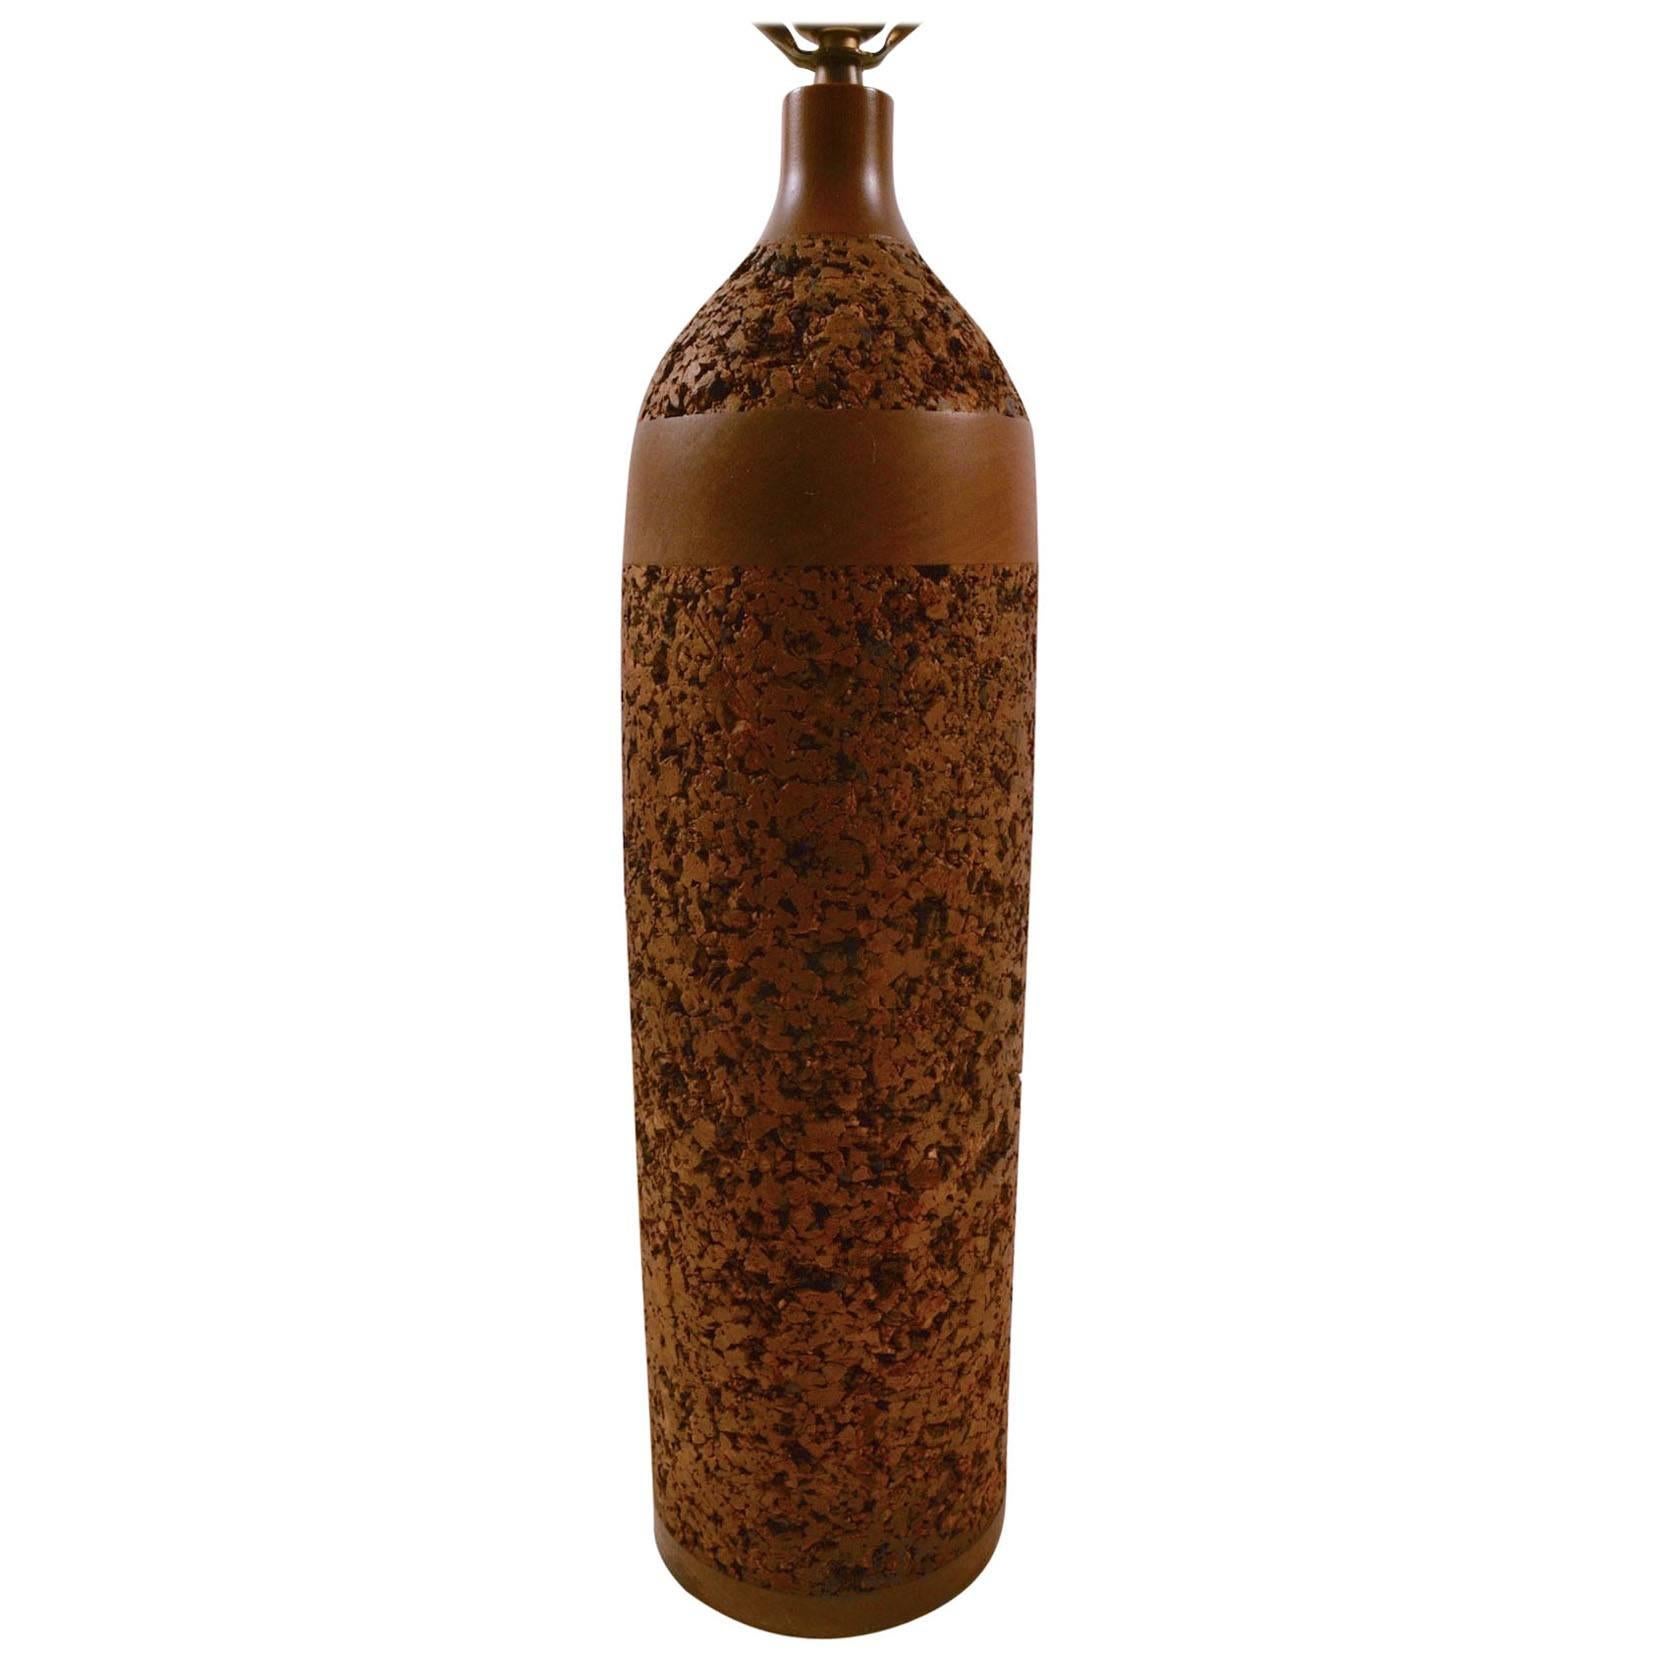 Bottle Form Cork and Wood Table Lamp